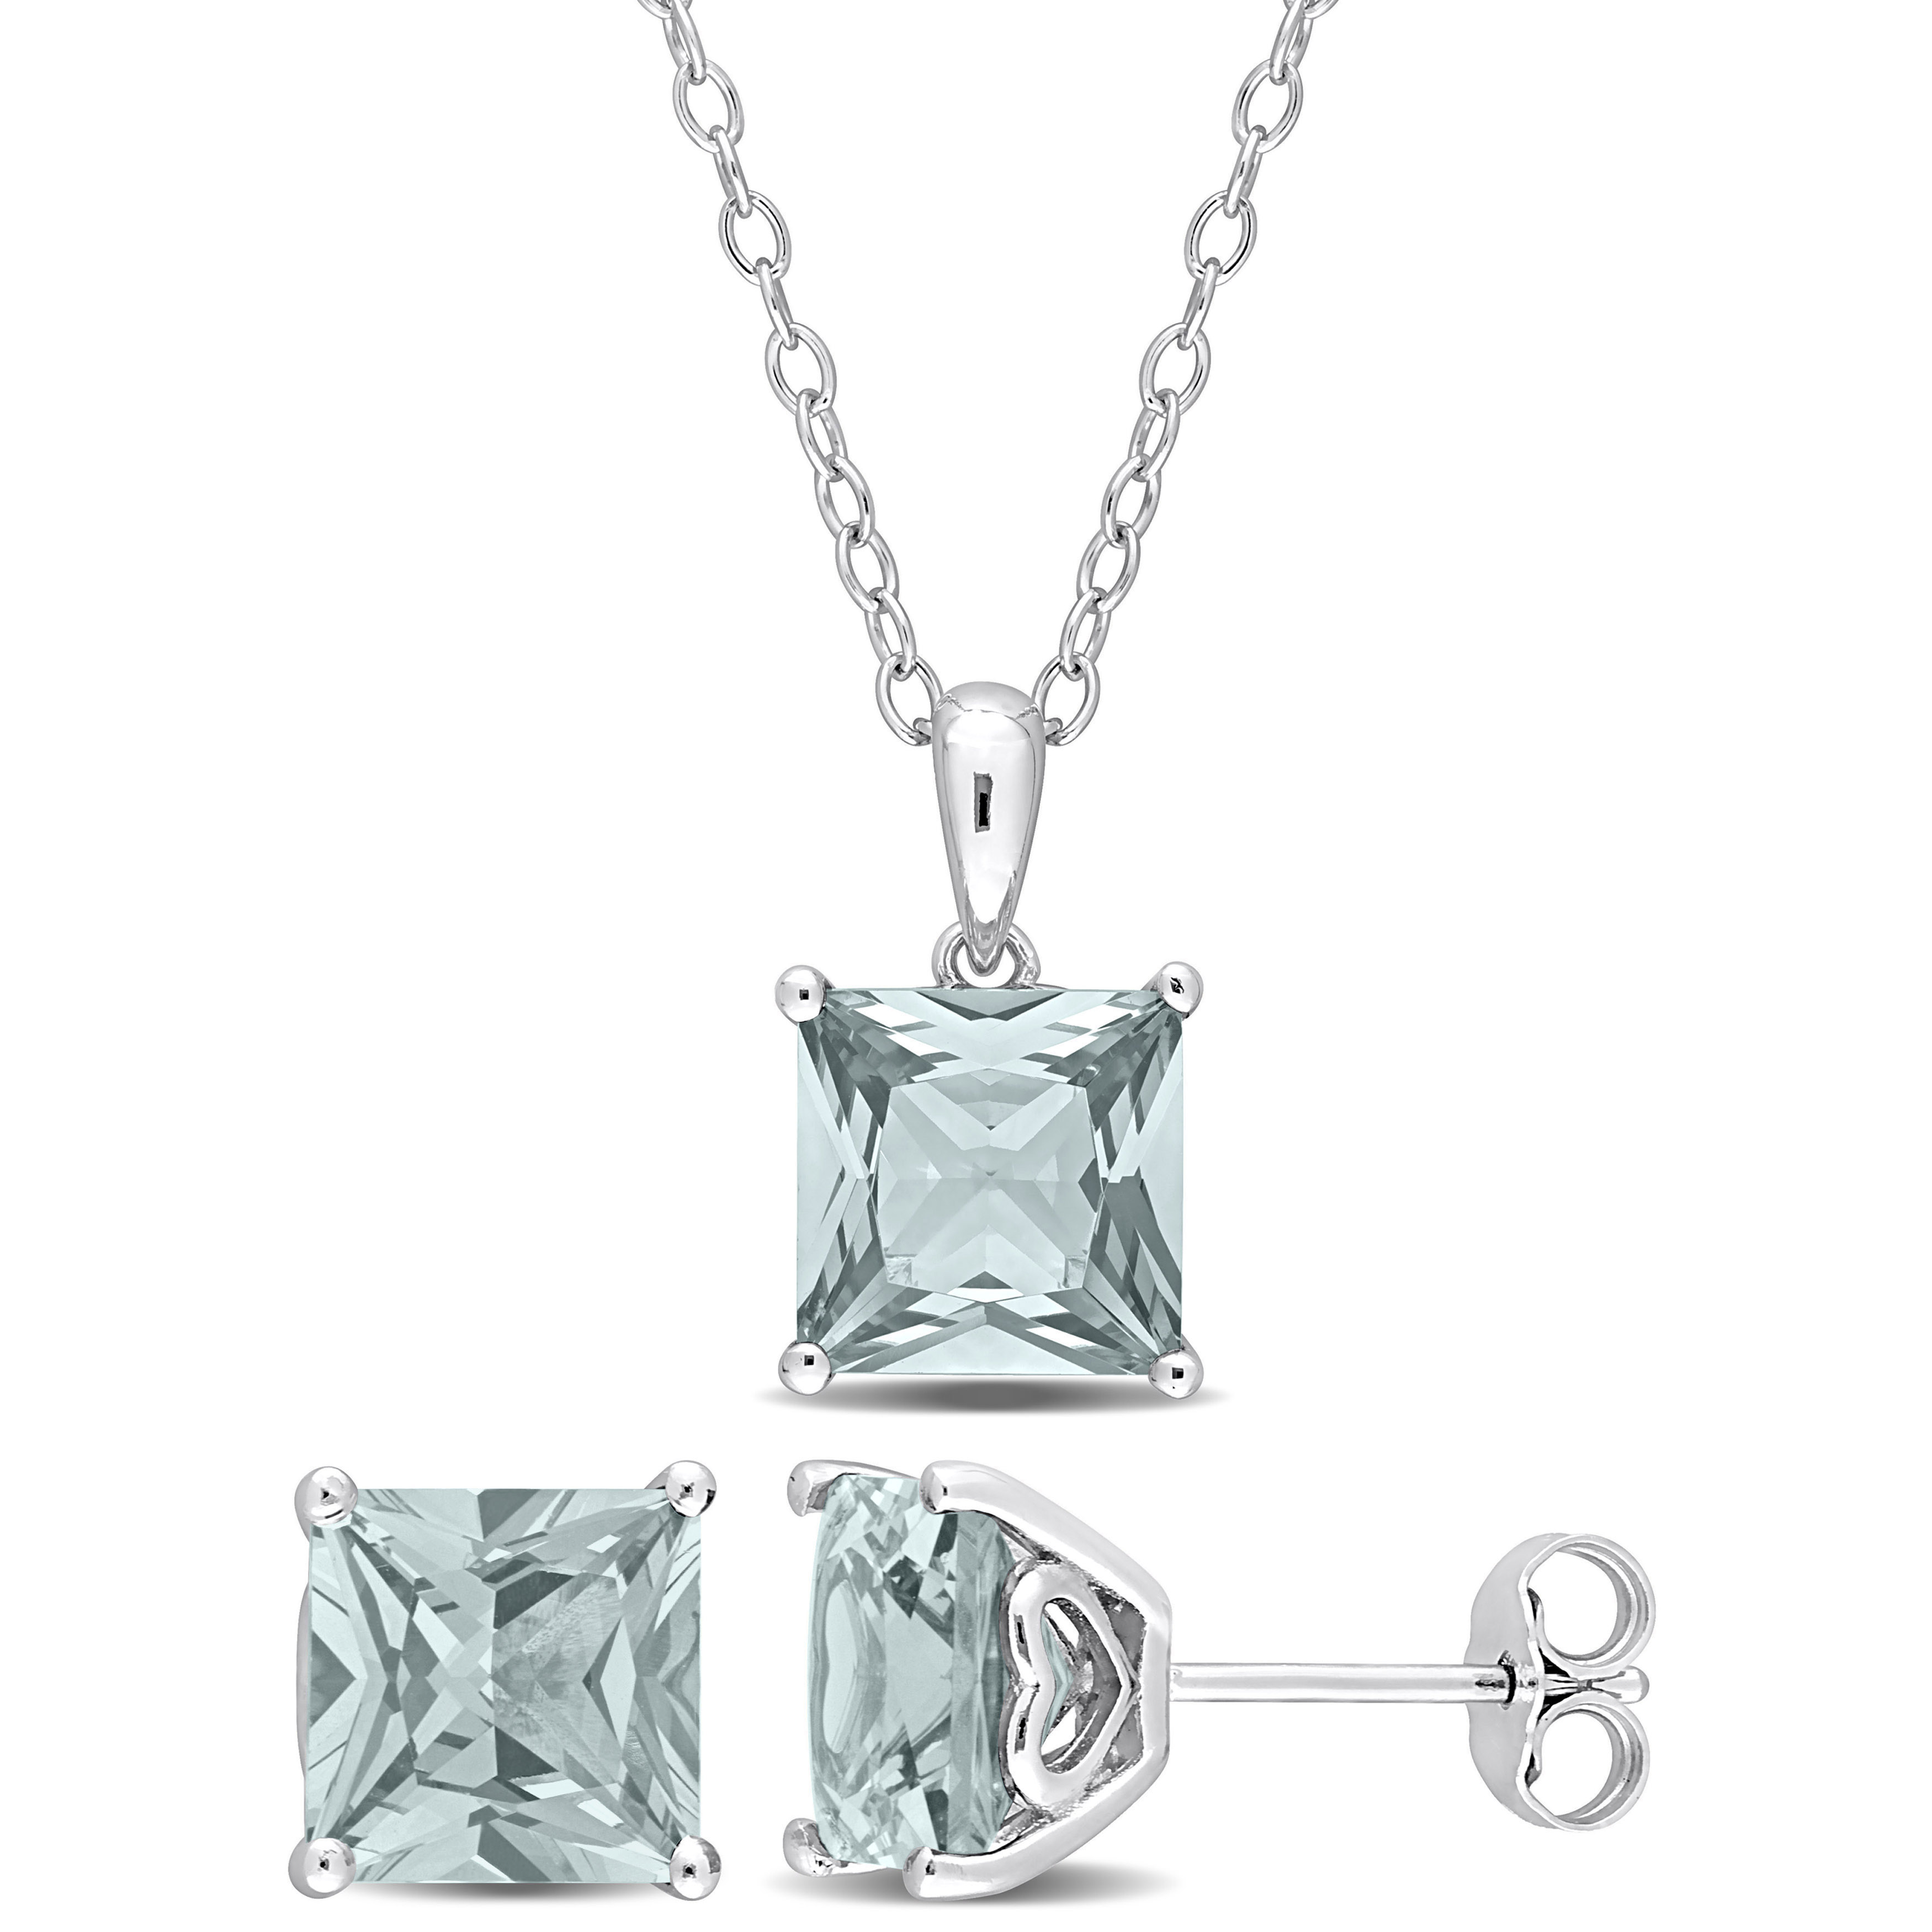 6 CT TGW Square Created Spinel (Aquamarine) 2-Piece Set of Pendant with Chain and Earrings in Sterling Silver